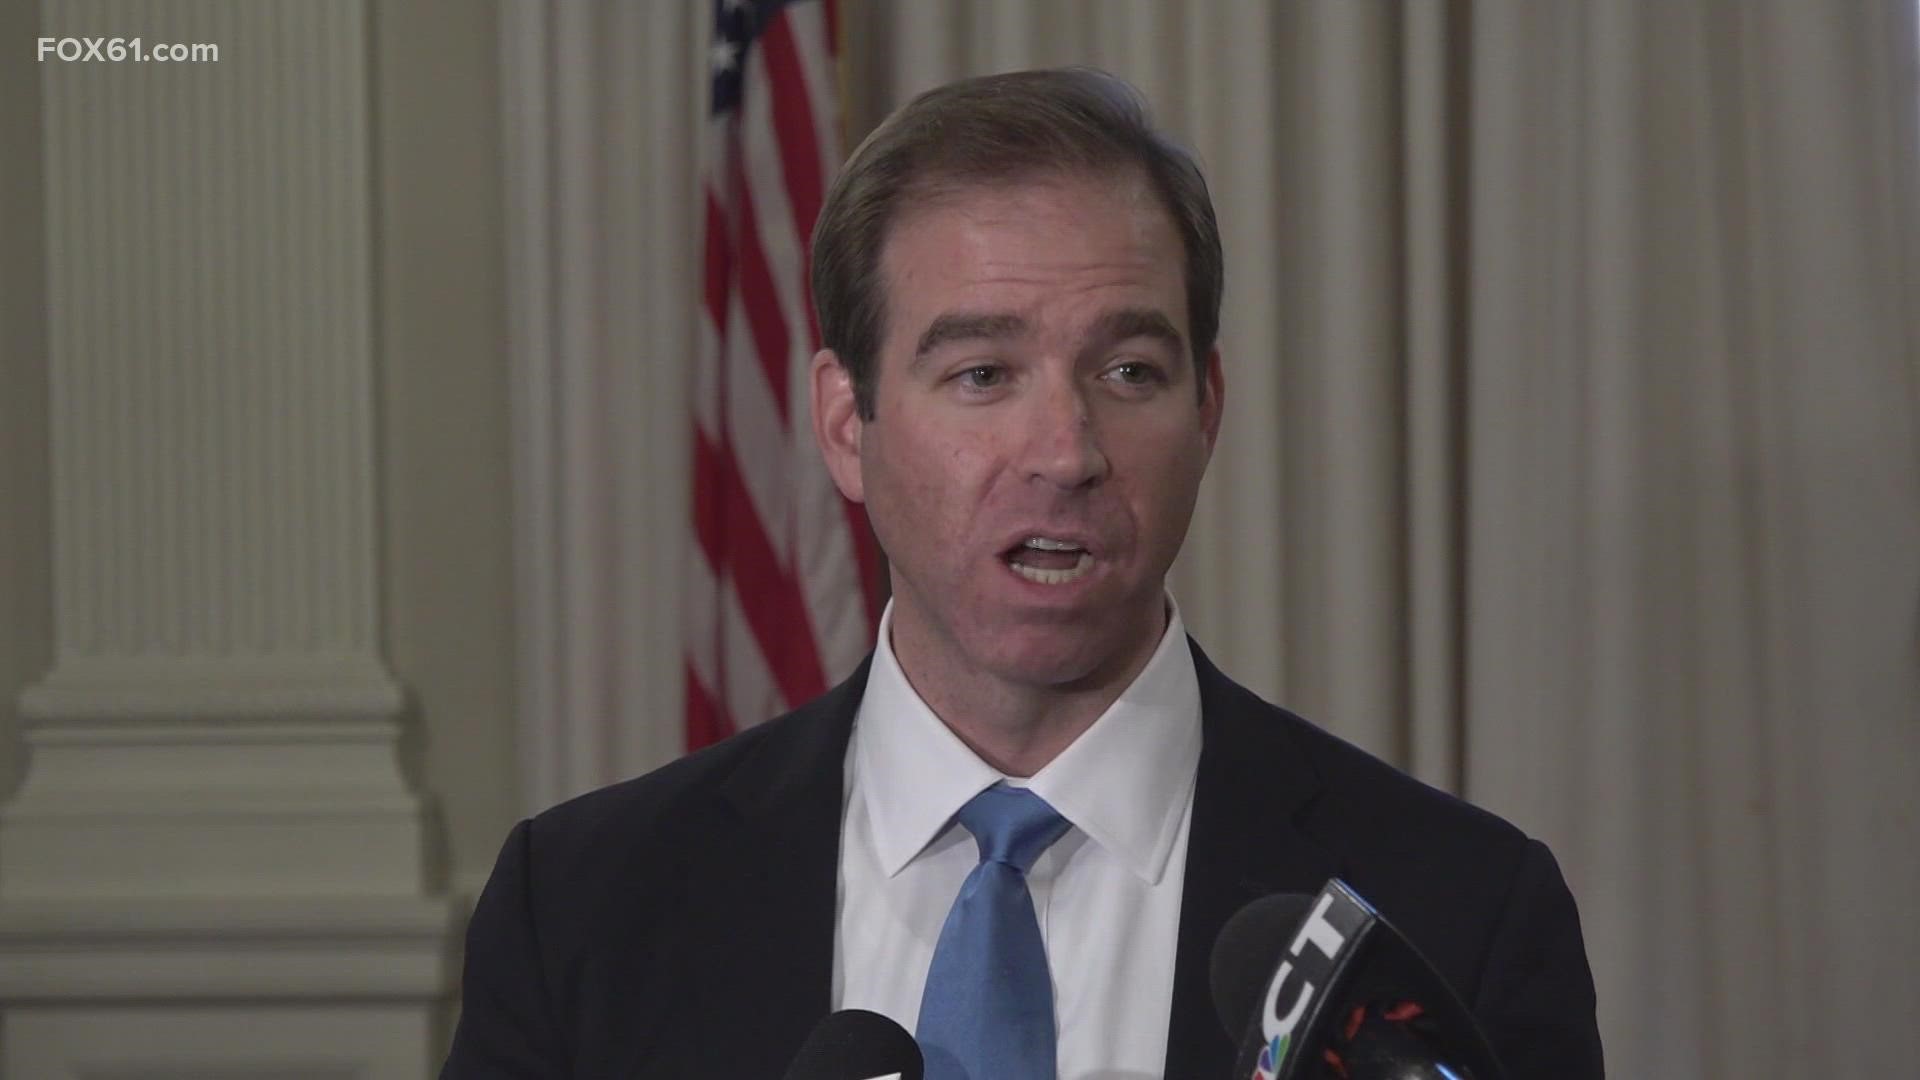 Bronin did not announce what his next role will be.